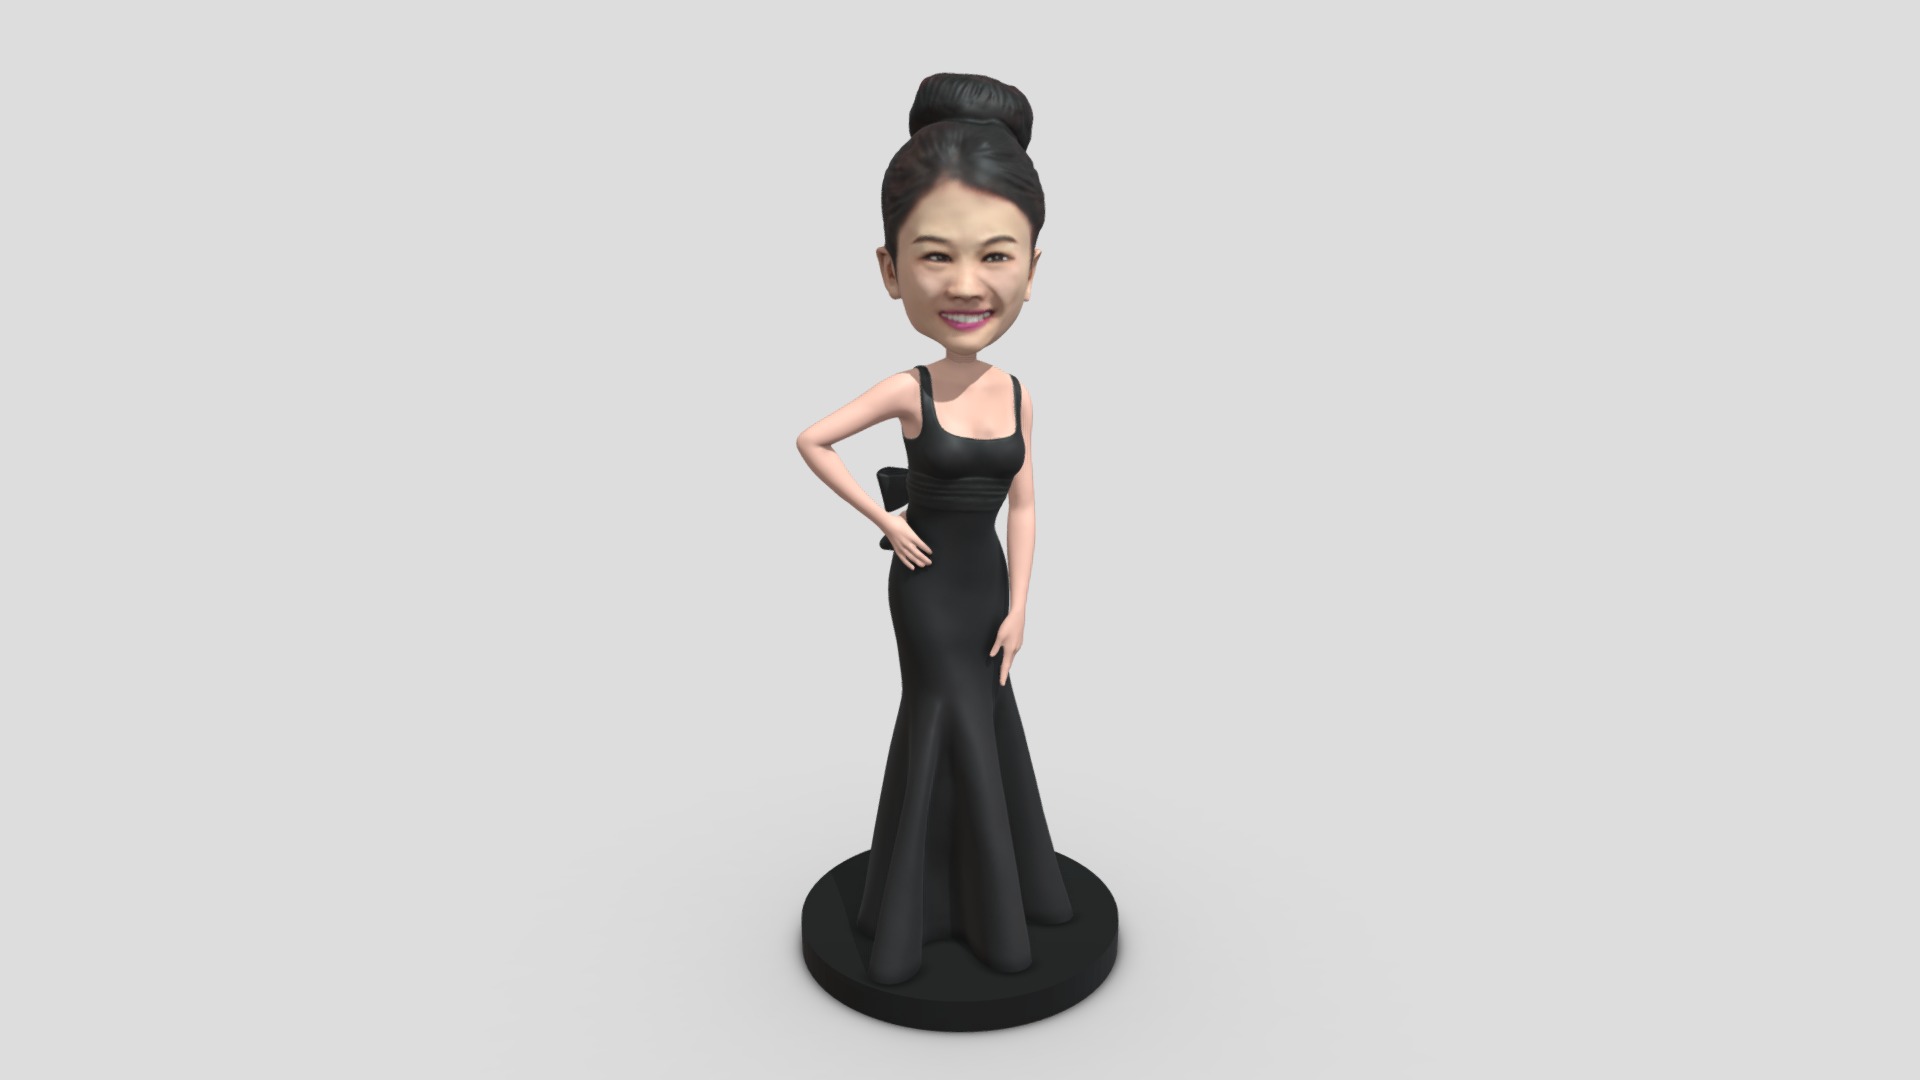 3D model 666-15CM2 - This is a 3D model of the 666-15CM2. The 3D model is about a person in a black dress.